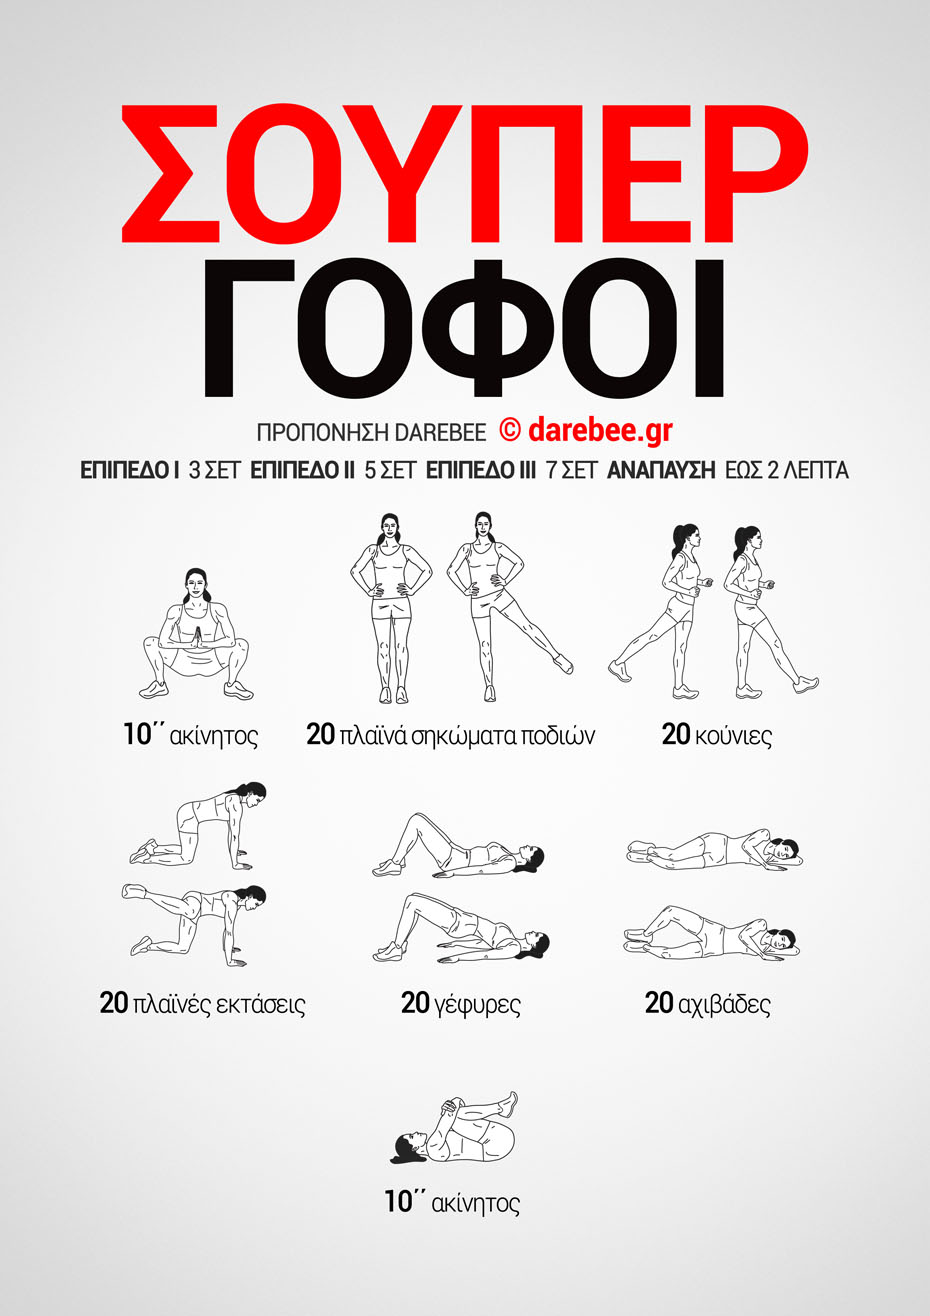 Hip Strength is a Darebee home-fitness workout that helps you increase the power of your lower body by increasing range of movement (ROM) of the pelvic muscle area.